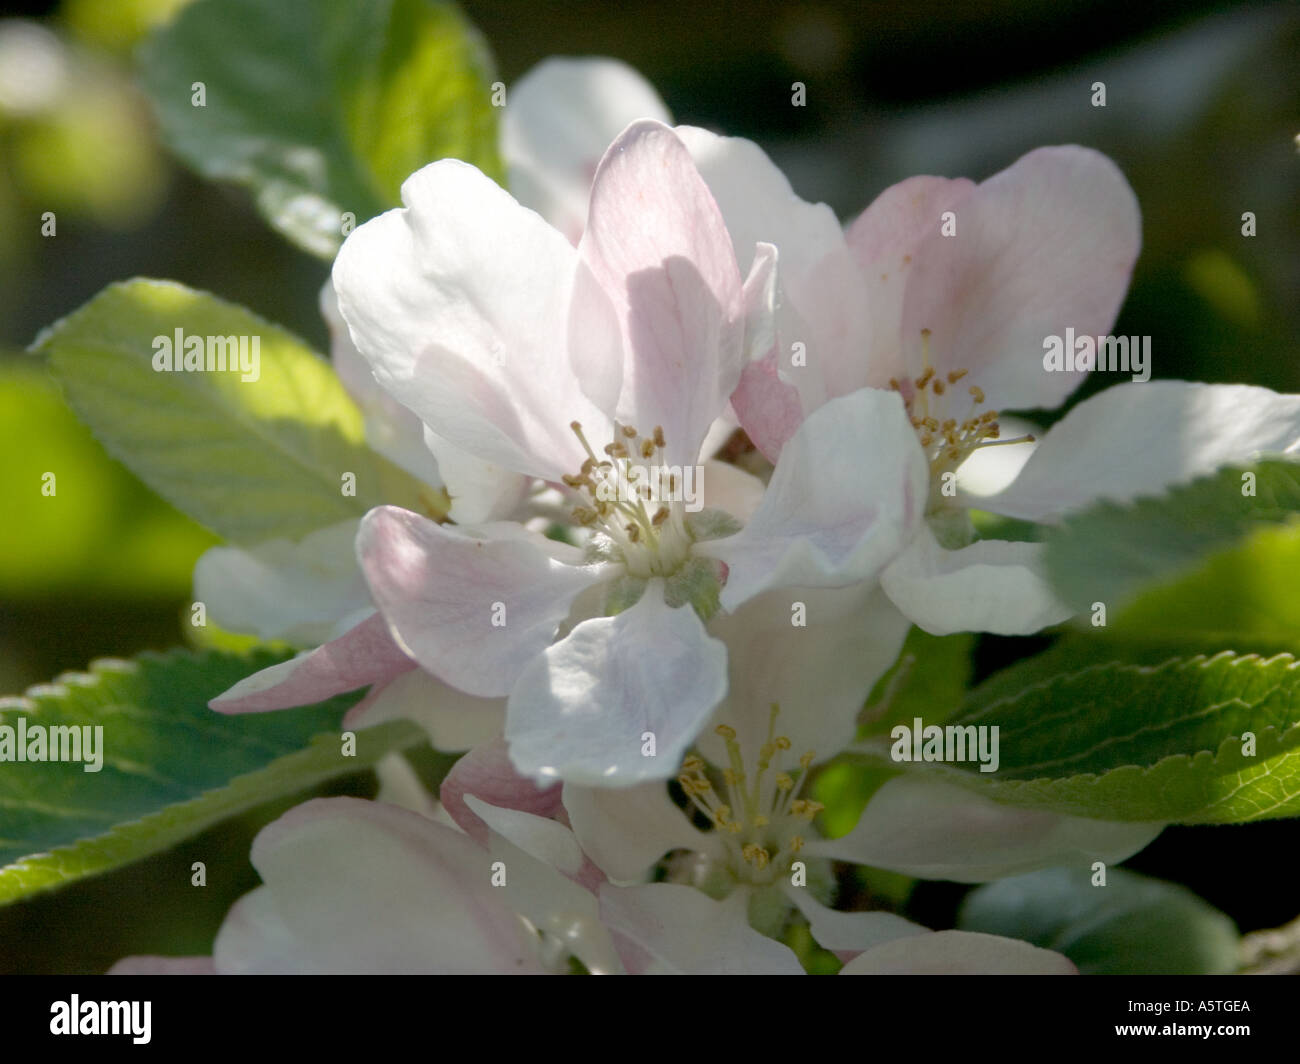 Cluster of Apple blossoms Stock Photo